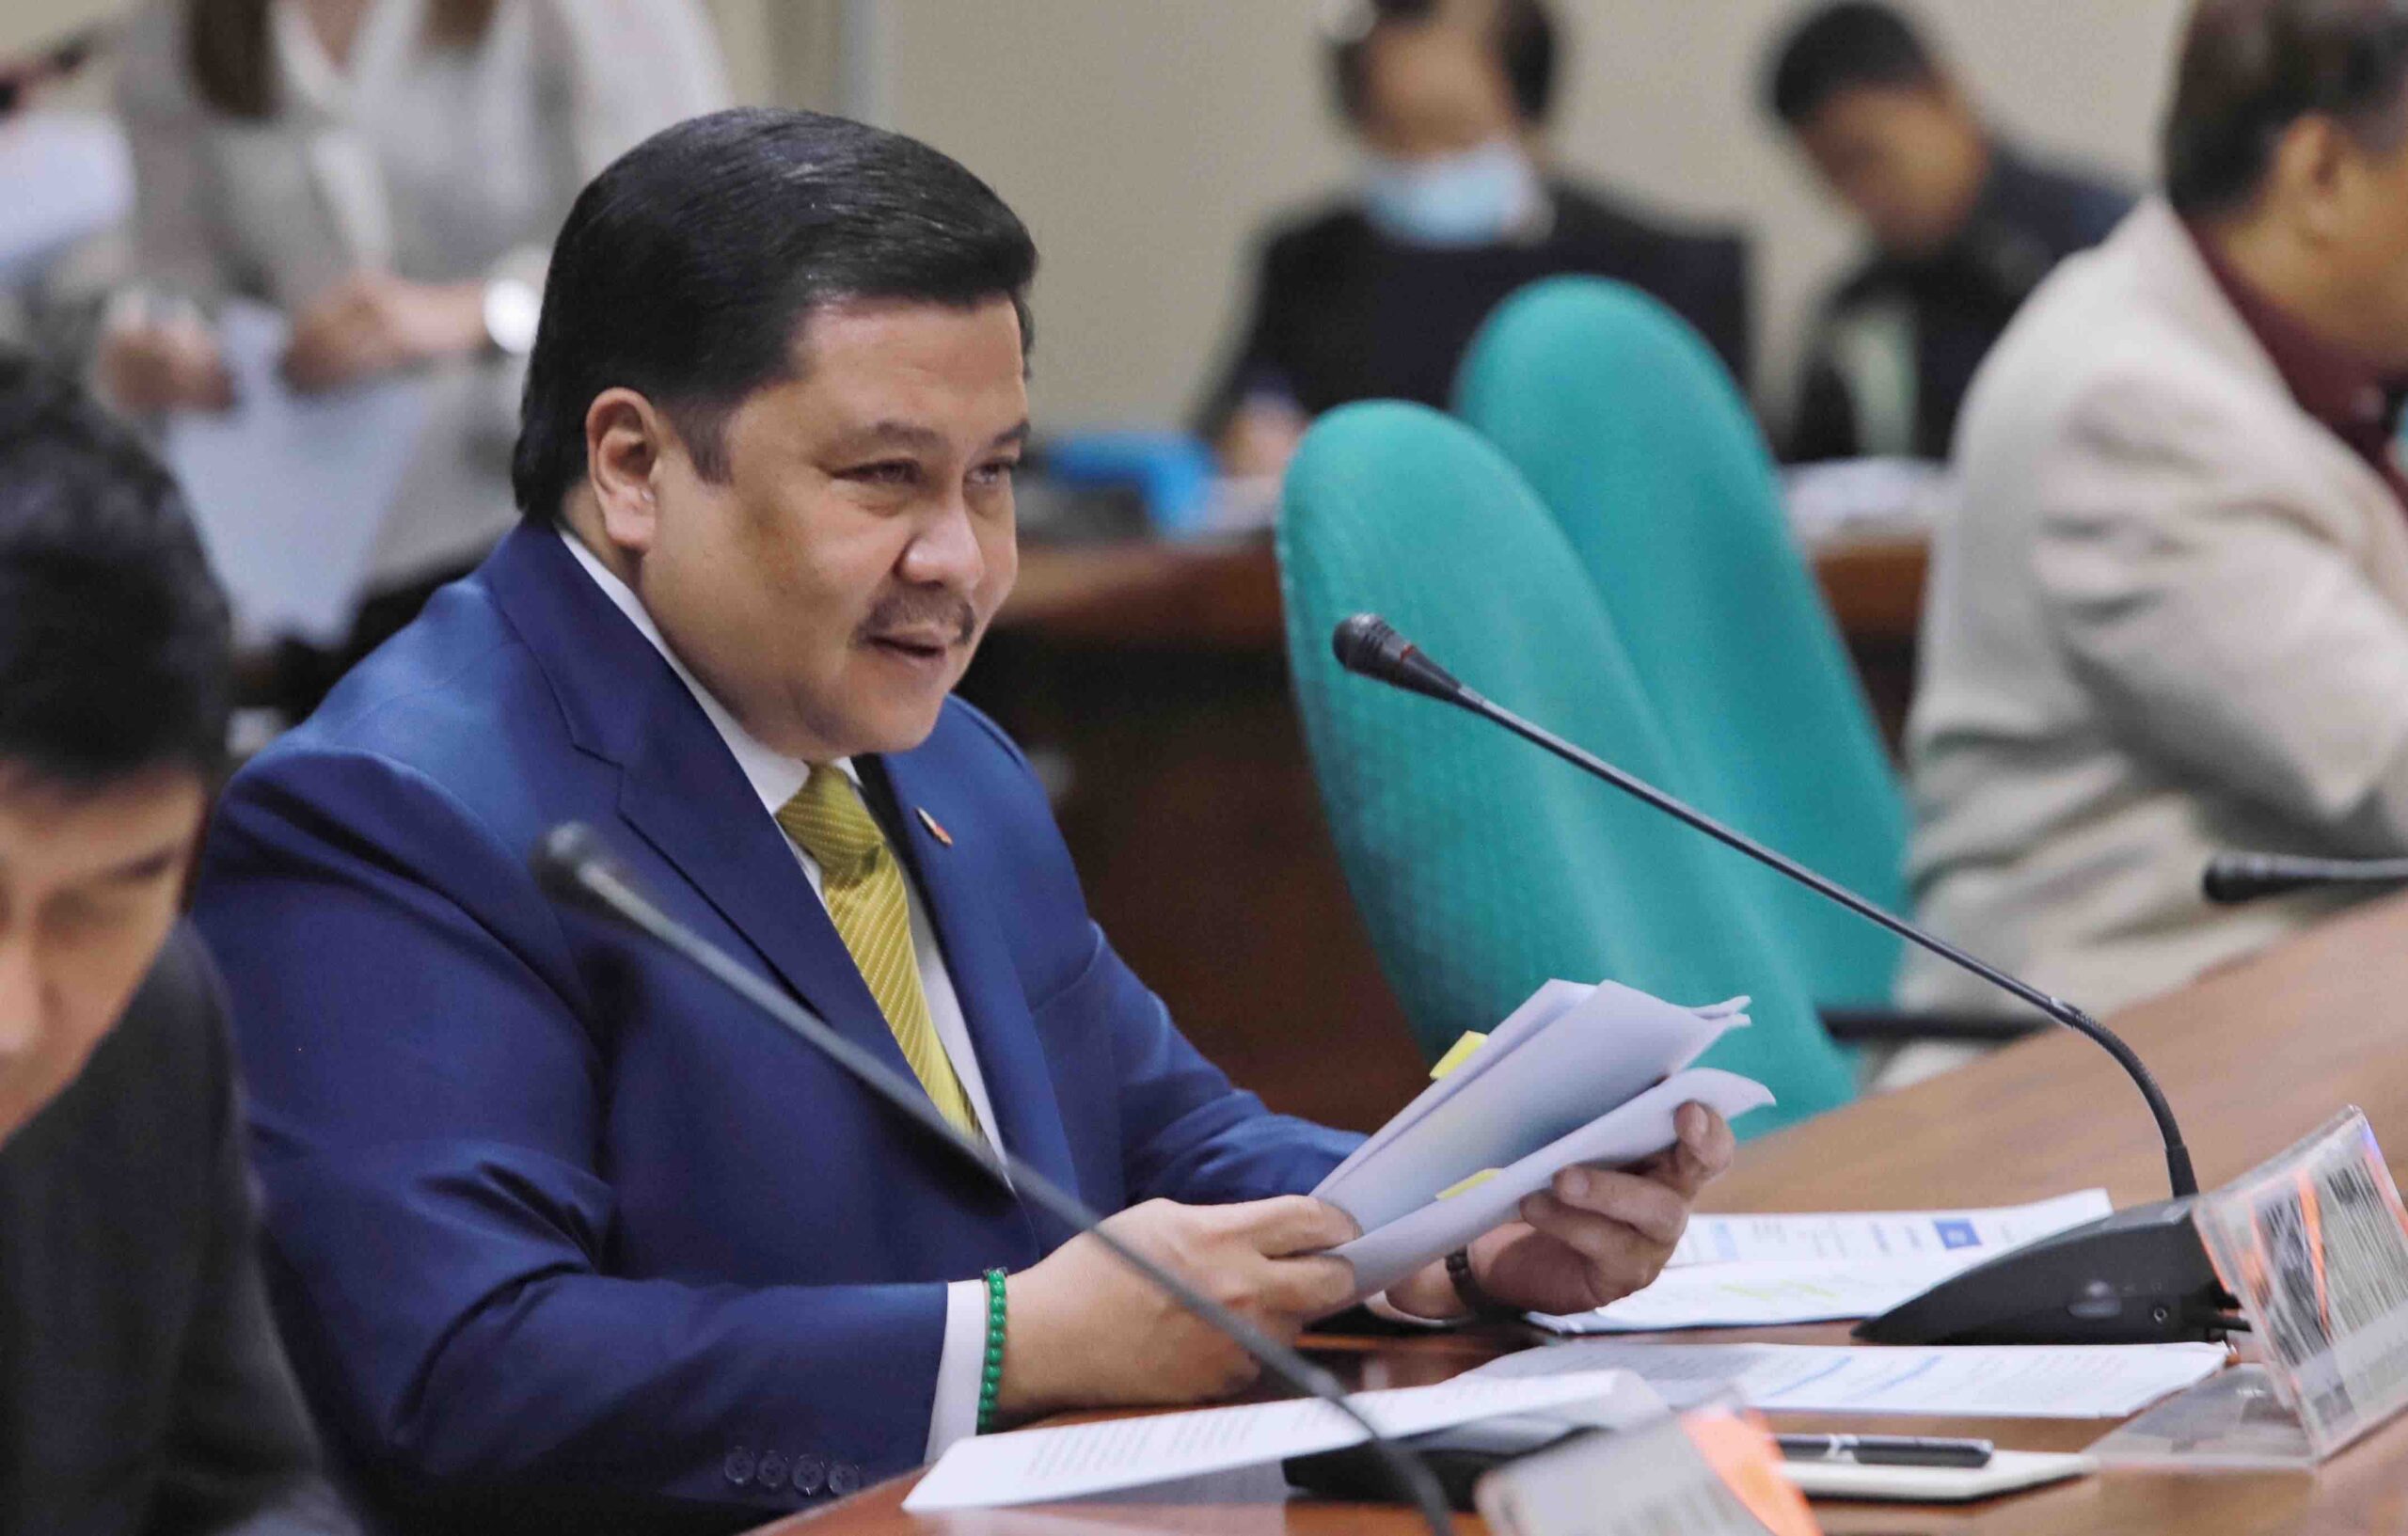 Laborers who brave the heat in their place of work deserve an additional incentives or benefits, Sen. Jinggoy Estrada suggested on Monday.